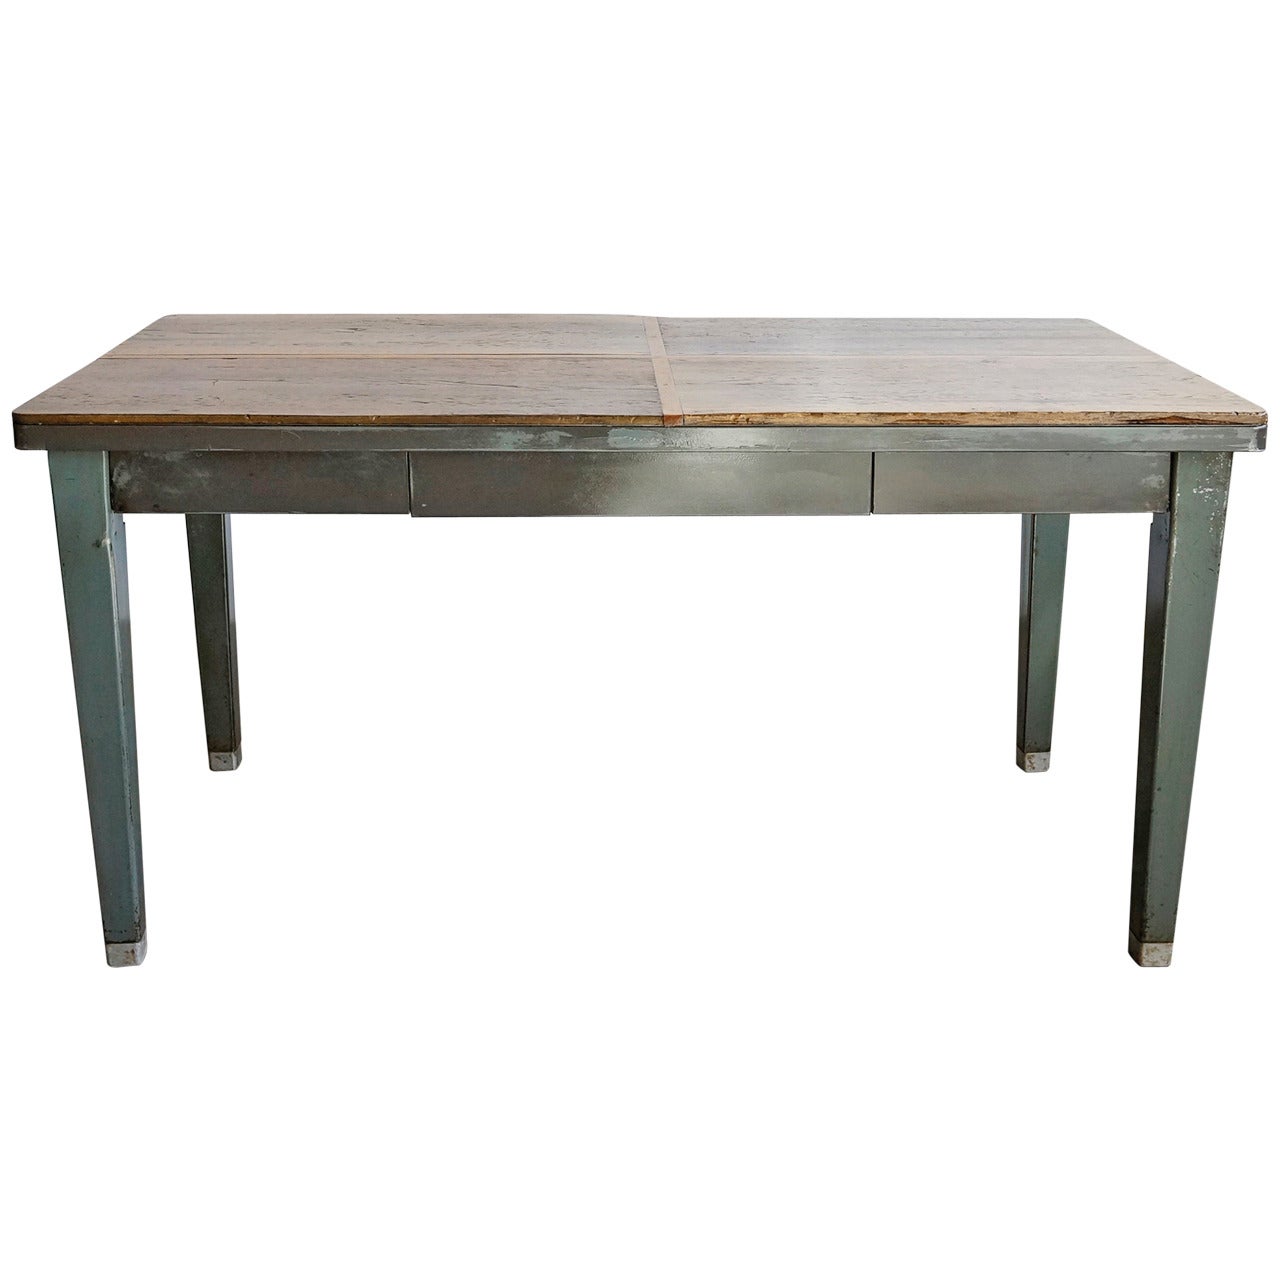 1940s Steel Tanker Table with Reclaimed Wood Top